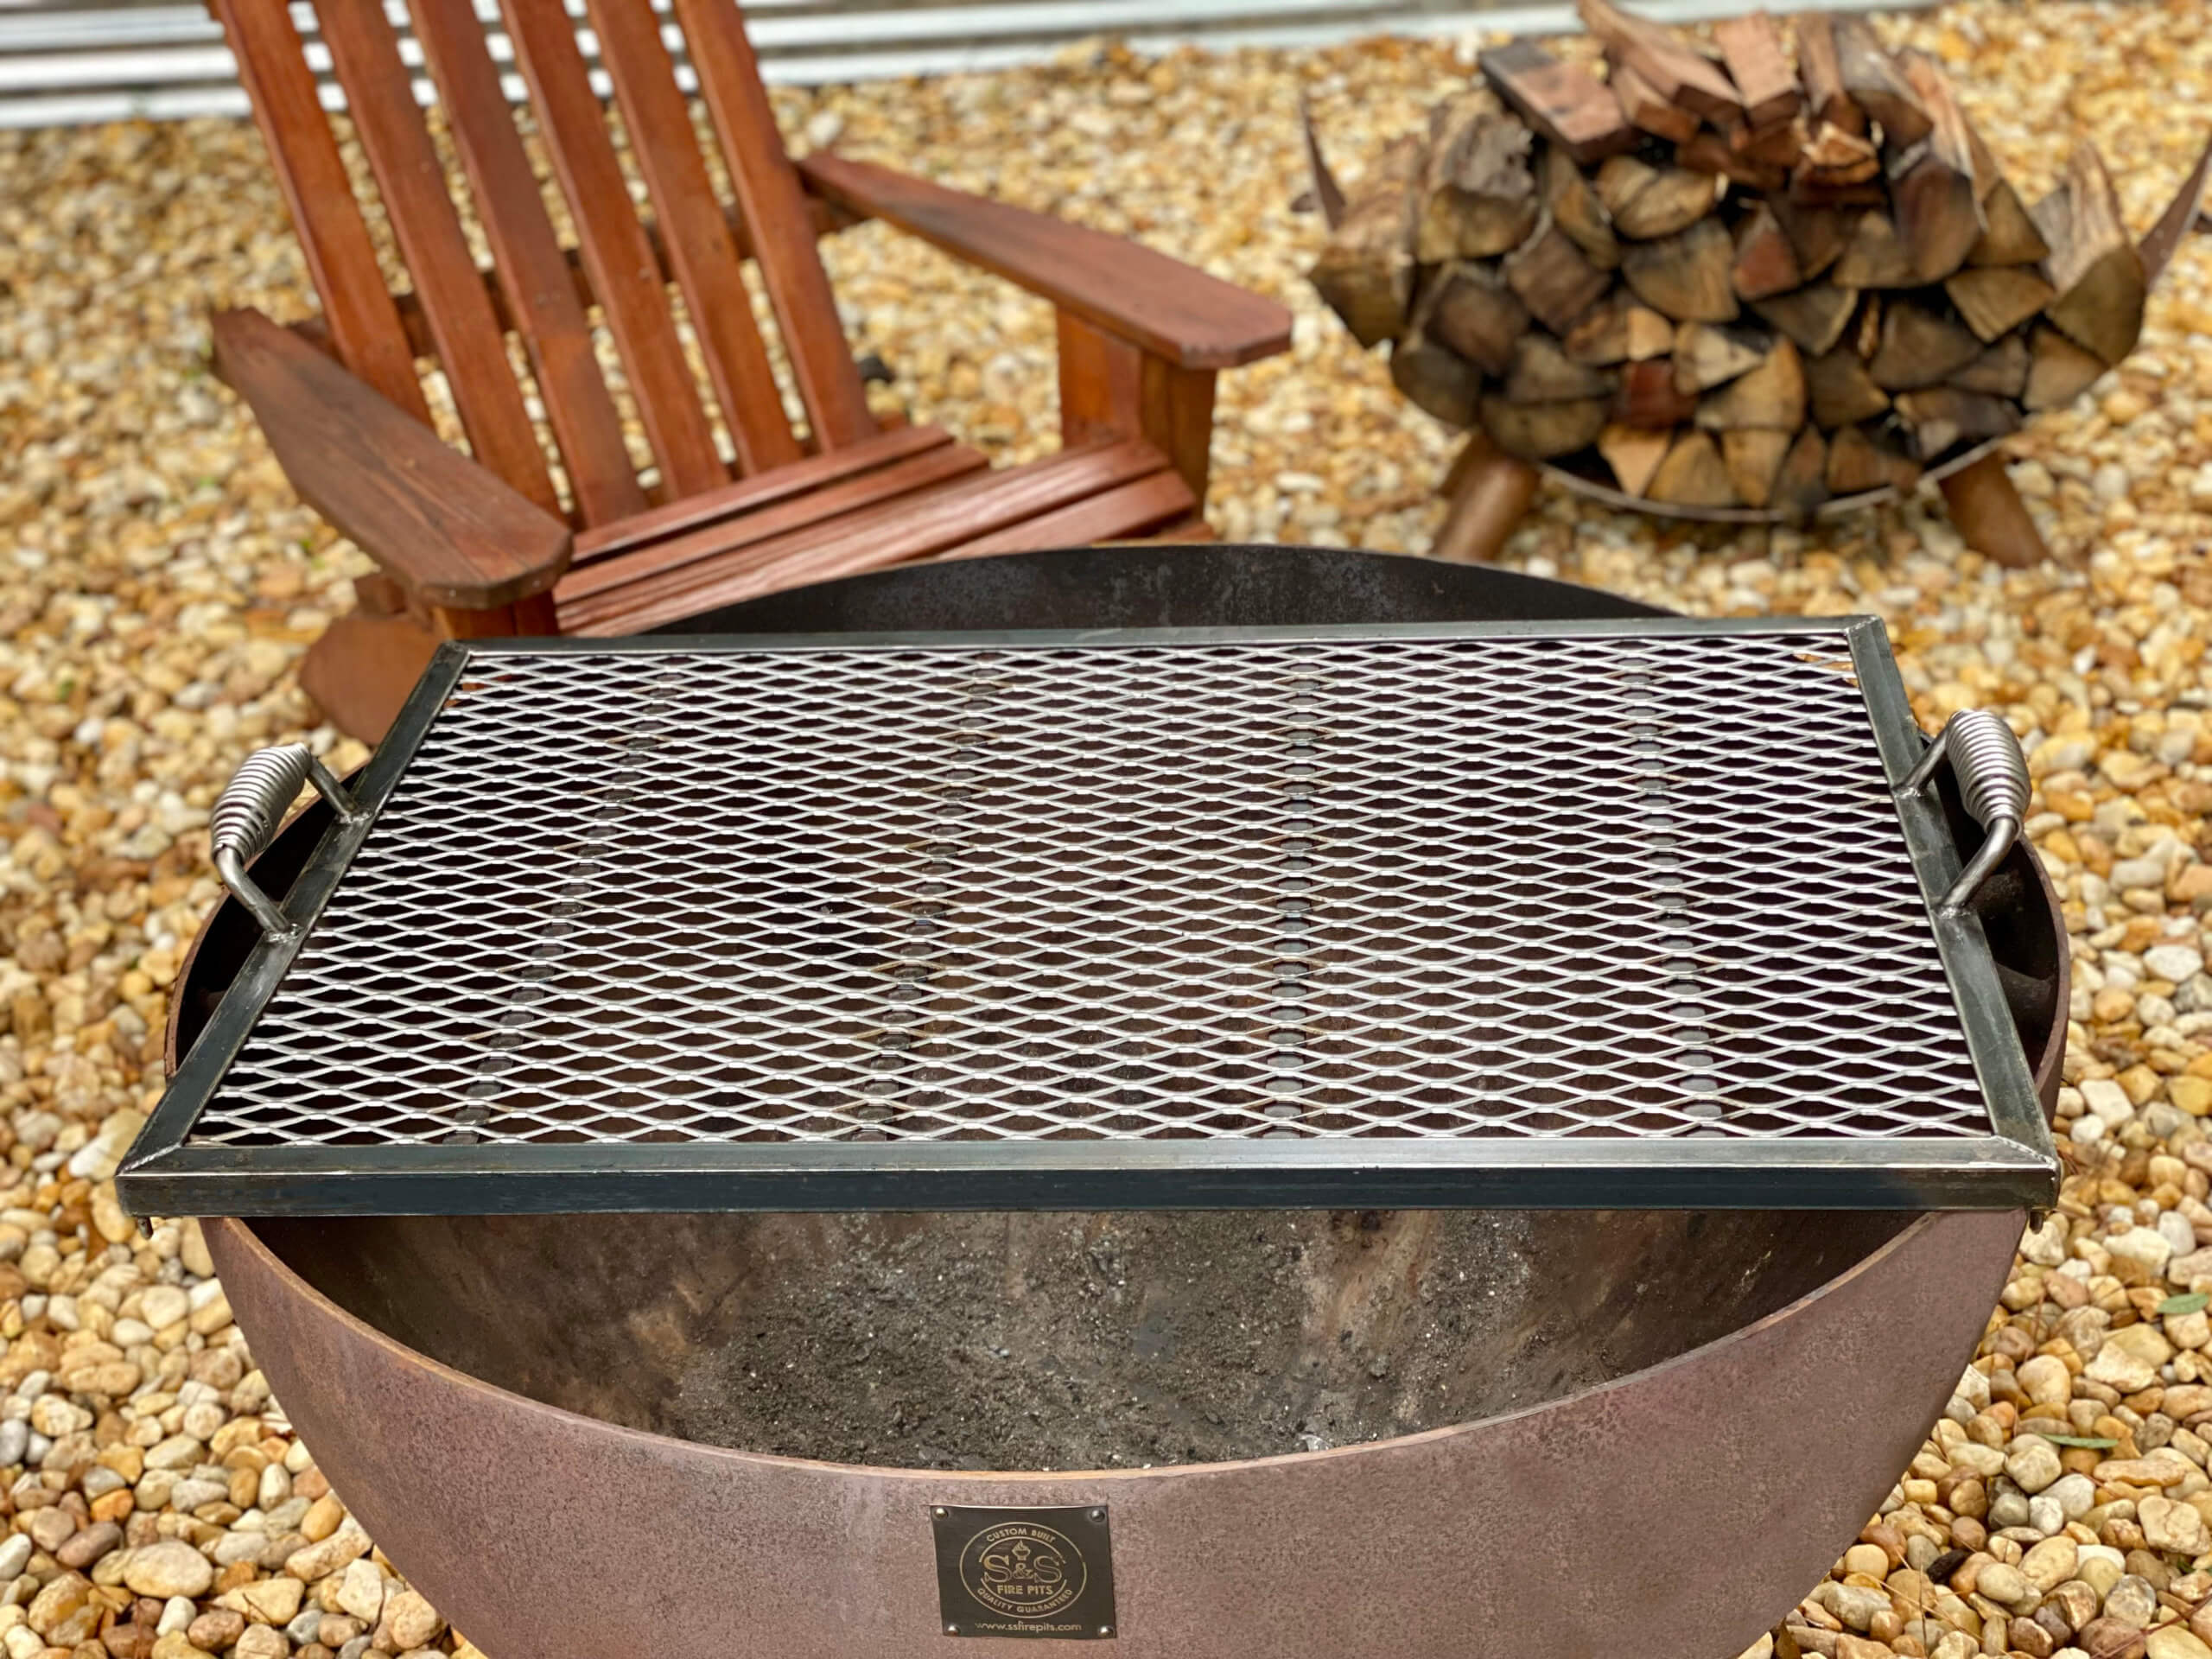 Handcrafted Fire Pit Cooking Grate, Round Fire Pit Cooking Grate